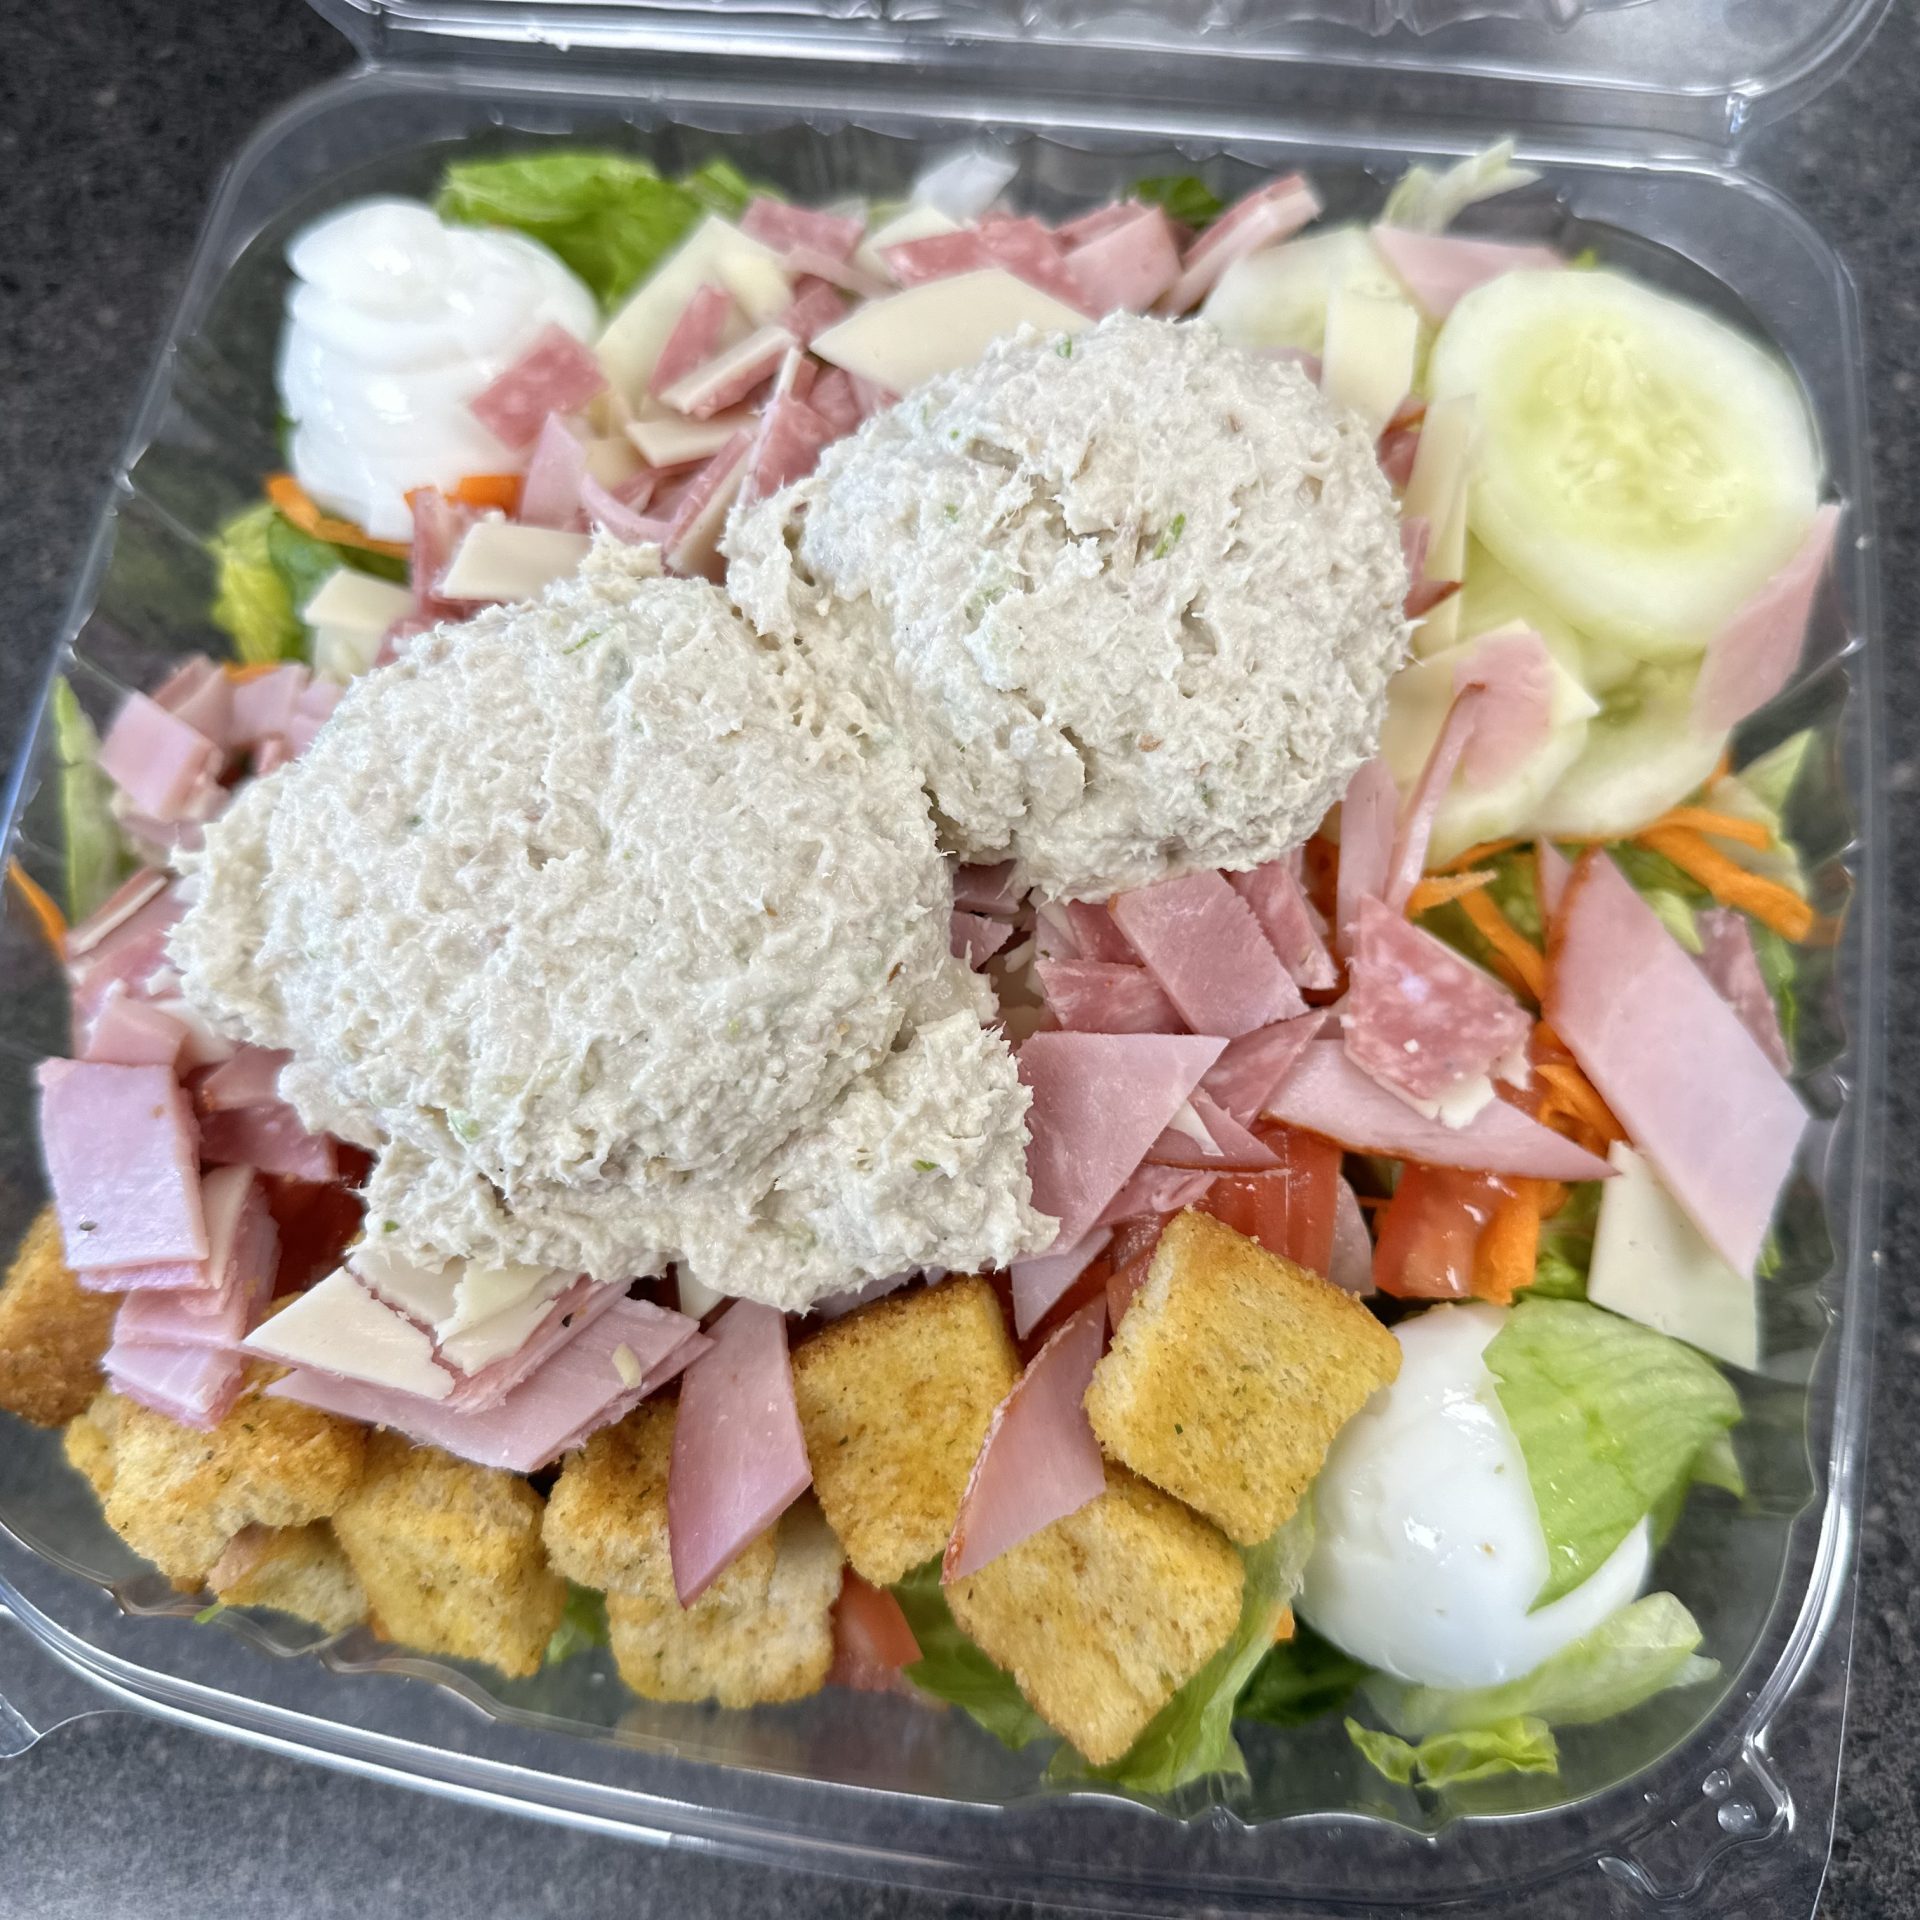 A salad with ham and croutons in a plastic container.